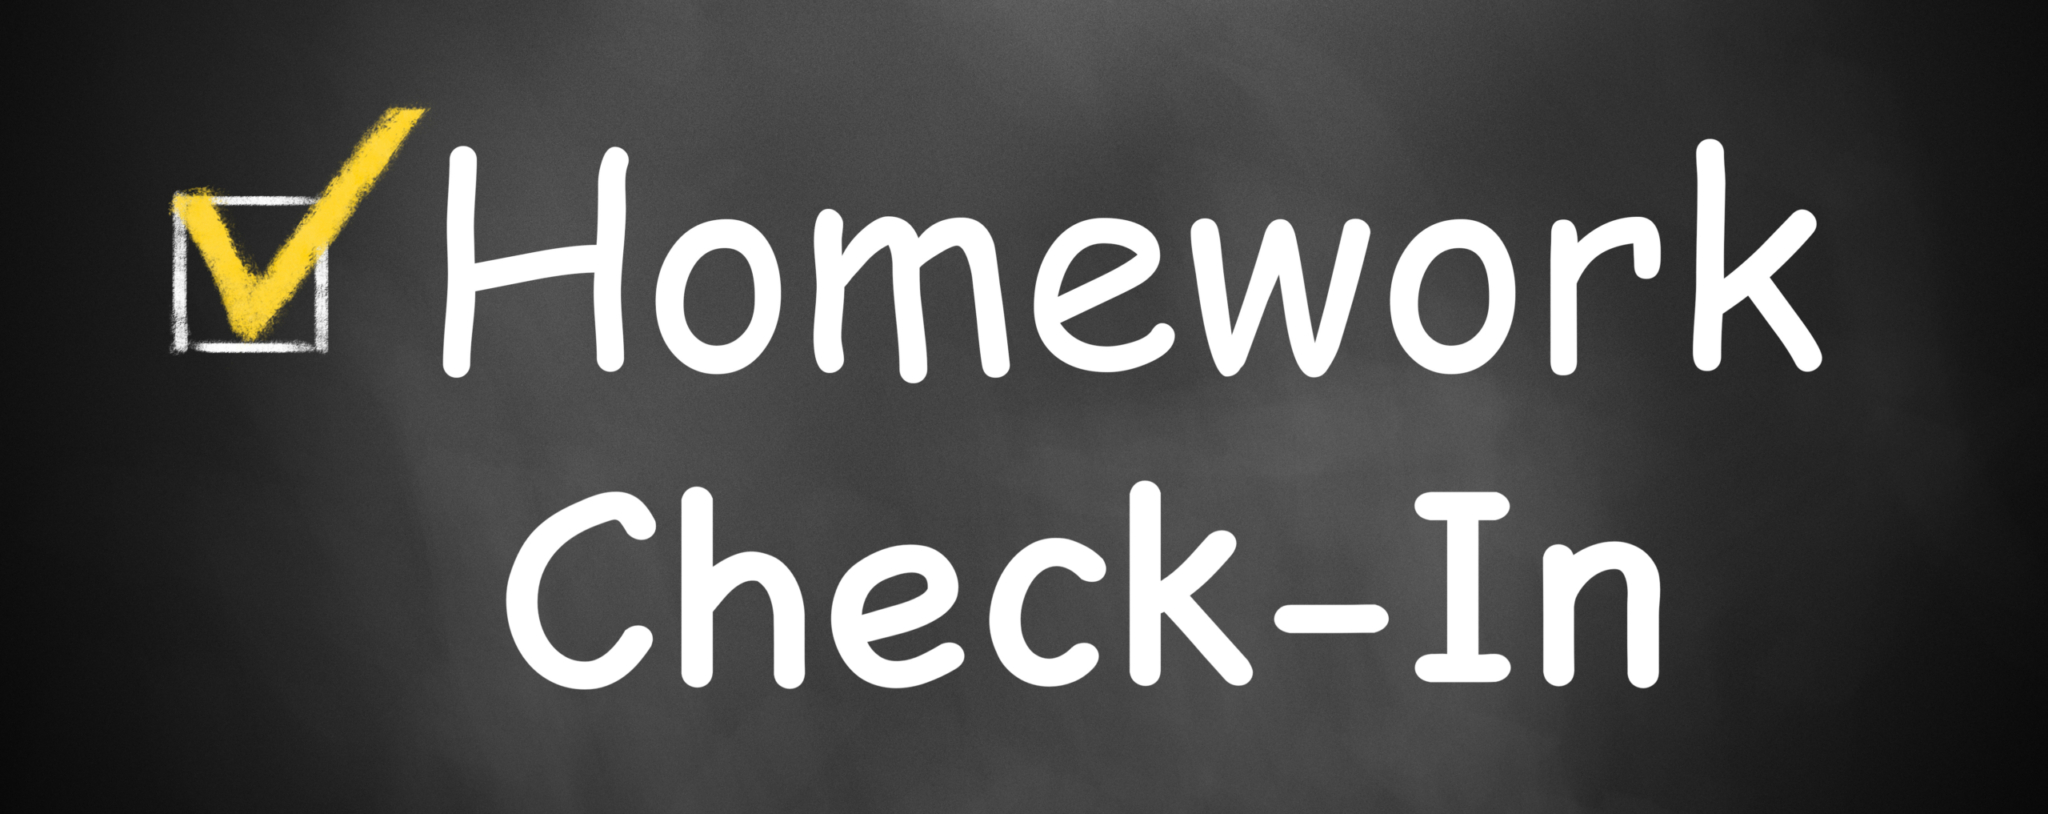 how to check homework online